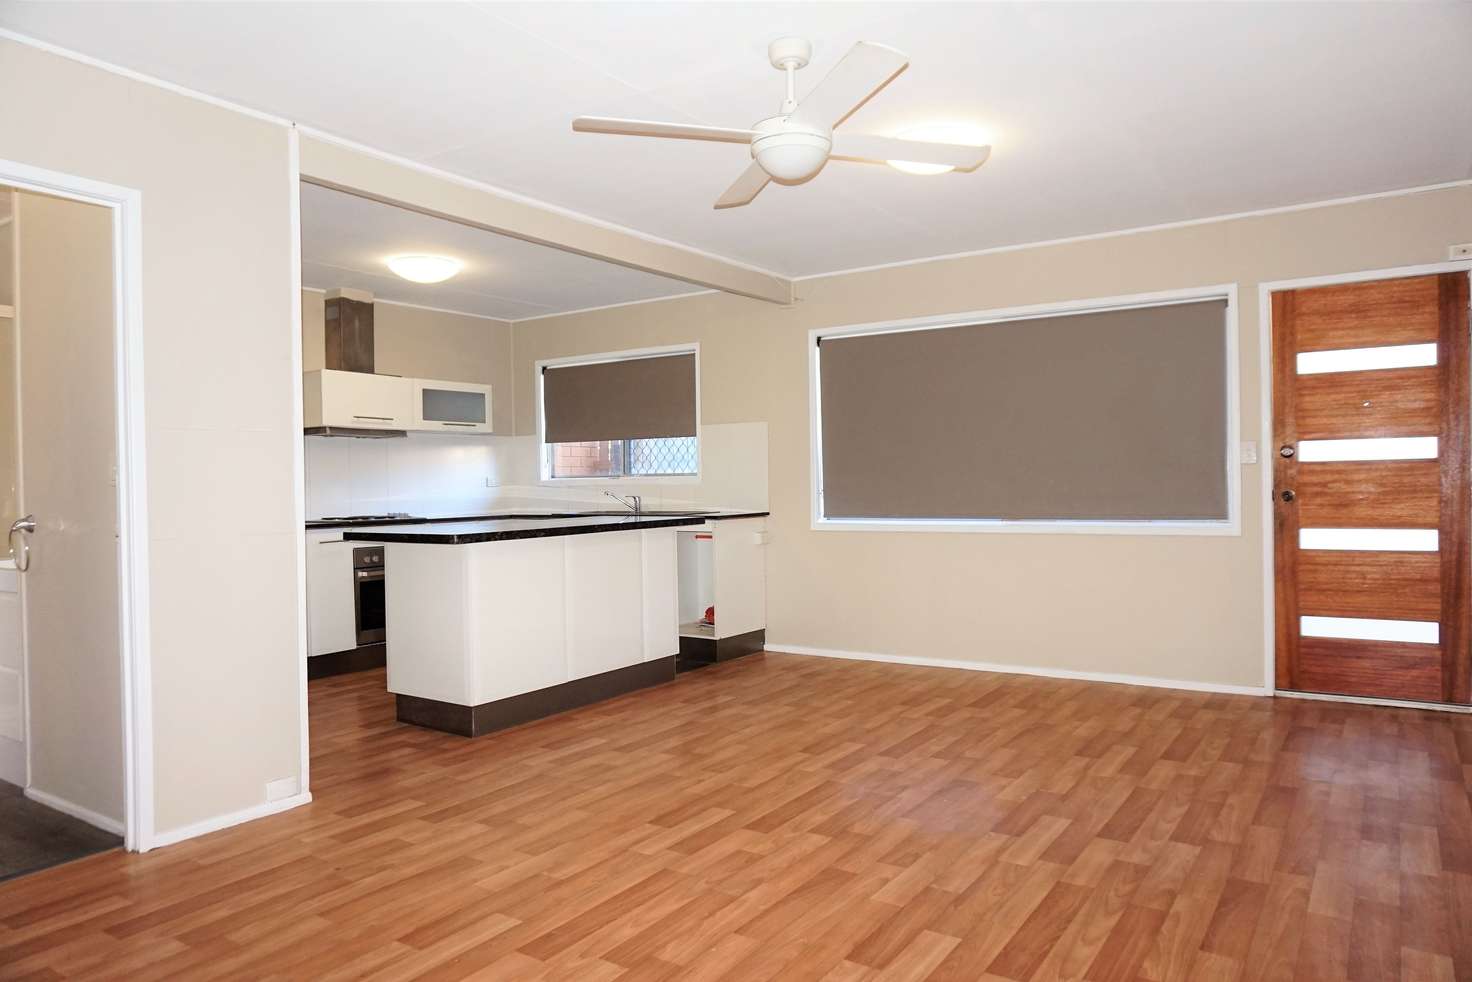 Main view of Homely unit listing, 24 Horton Street, Kingston QLD 4114